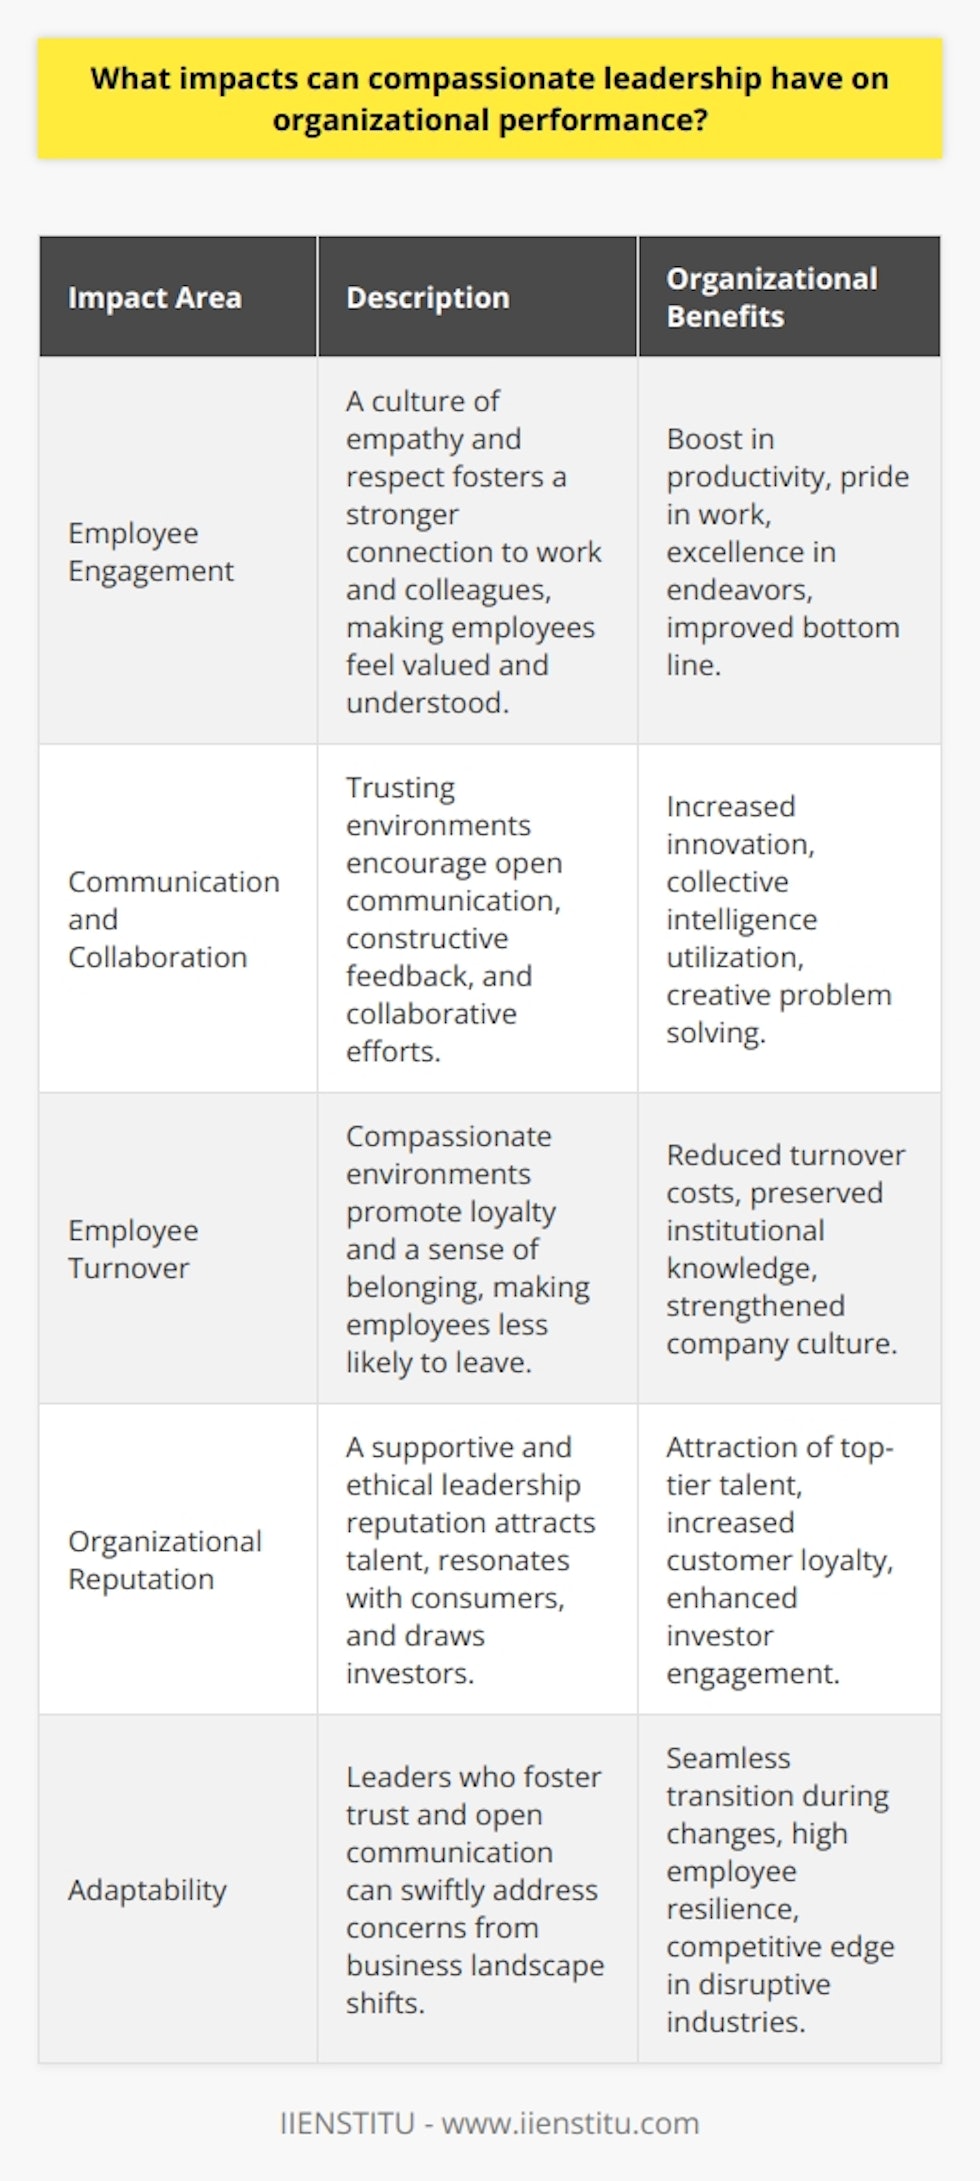 Compassionate leadership is more than just a trendy term; it's a transformative approach that has a profound impact on organizational performance. By leading with empathy and concern for others' well-being, compassionate leaders can shape an organizational culture that drives employee engagement, cohesiveness, and resilience. Let's delve into the specifics of these impacts.**Positive Effects on Employee Engagement**An essential ingredient for a successful organization is a workforce that is engaged, passionate, and motivated. Compassionate leaders have a powerful influence on employee engagement by creating a culture of empathy and respect. In such environments, employees tend to develop a stronger connection to their work and colleagues. They feel heard and understood, which in turn encourages them to put forward their best effort, take pride in their contributions, and aim for excellence in their endeavors. This emotional investment from the workforce leads to a boost in productivity and an improved bottom line for the organization.**Enhanced Communication and Collaboration**Leaders who practice compassion pave the way for more transparent and effective communication. Trust is the cornerstone of any solid relationship, and when employees trust their leaders to act with their interests at heart, they communicate more openly. This openness nurtures an environment where feedback is shared constructively, ideas are exchanged freely, and collaboration is the default mode of working. As a result, organizations become innovative powerhouses where collective intelligence is harnessed, and problems are solved more creatively and efficiently.**Reduced Employee Turnover**One of the significant challenges organizations face is the retention of talented staff. Compassionate leadership significantly reduces turnover rates by cultivating loyalty and a sense of belonging among employees. In a workplace where the leadership cares for the well-being and professional growth of its people, employees are less likely to seek opportunities elsewhere. Such consistency in the workforce not only saves costs associated with turnover but also builds institutional knowledge and nurtures a strong, united company culture.**Improved Organizational Reputation**The benefits of compassionate leadership extend beyond the internal workings of an organization; they also enhance the external perception of the brand. Companies known for their caring and supportive leadership attract positive attention. This reputation for being a great place to work is invaluable in drawing in top-tier talent, and it often resonates with consumers, leading to increased customer loyalty and advocacy. Moreover, investors are typically more inclined to engage with companies that demonstrate a commitment to ethical leadership and social responsibility.**Increased Adaptability**Organizations led by compassionate leaders are better equipped to adapt to change. Because they prioritize open communication and have already built up a reserve of trust, these leaders can swiftly and effectively address concerns that arise from shifts in the business landscape. Employees feel involved and supported during transitions, making them more open to embrace change. This adaptability is critical in an era when industries are continually disrupted by new technologies and market shifts.In the realm of compassionate leadership, an institution like IIENSTITU underscores the importance of developing leaders who can navigate complex human dynamics and create enriching work environments. By emphasizing such leadership traits, organizations will not only thrive in their internal ecosystem but also stand out in the competitive business world.In essence, compassionate leadership manifests itself through myriad positive outcomes, from increasing individual performance and team synergy to enhancing company resilience and competitiveness. It's a holistic approach that translates into substantial benefits for both the organization and its people, proving indispensable in the pursuit of enduring success.